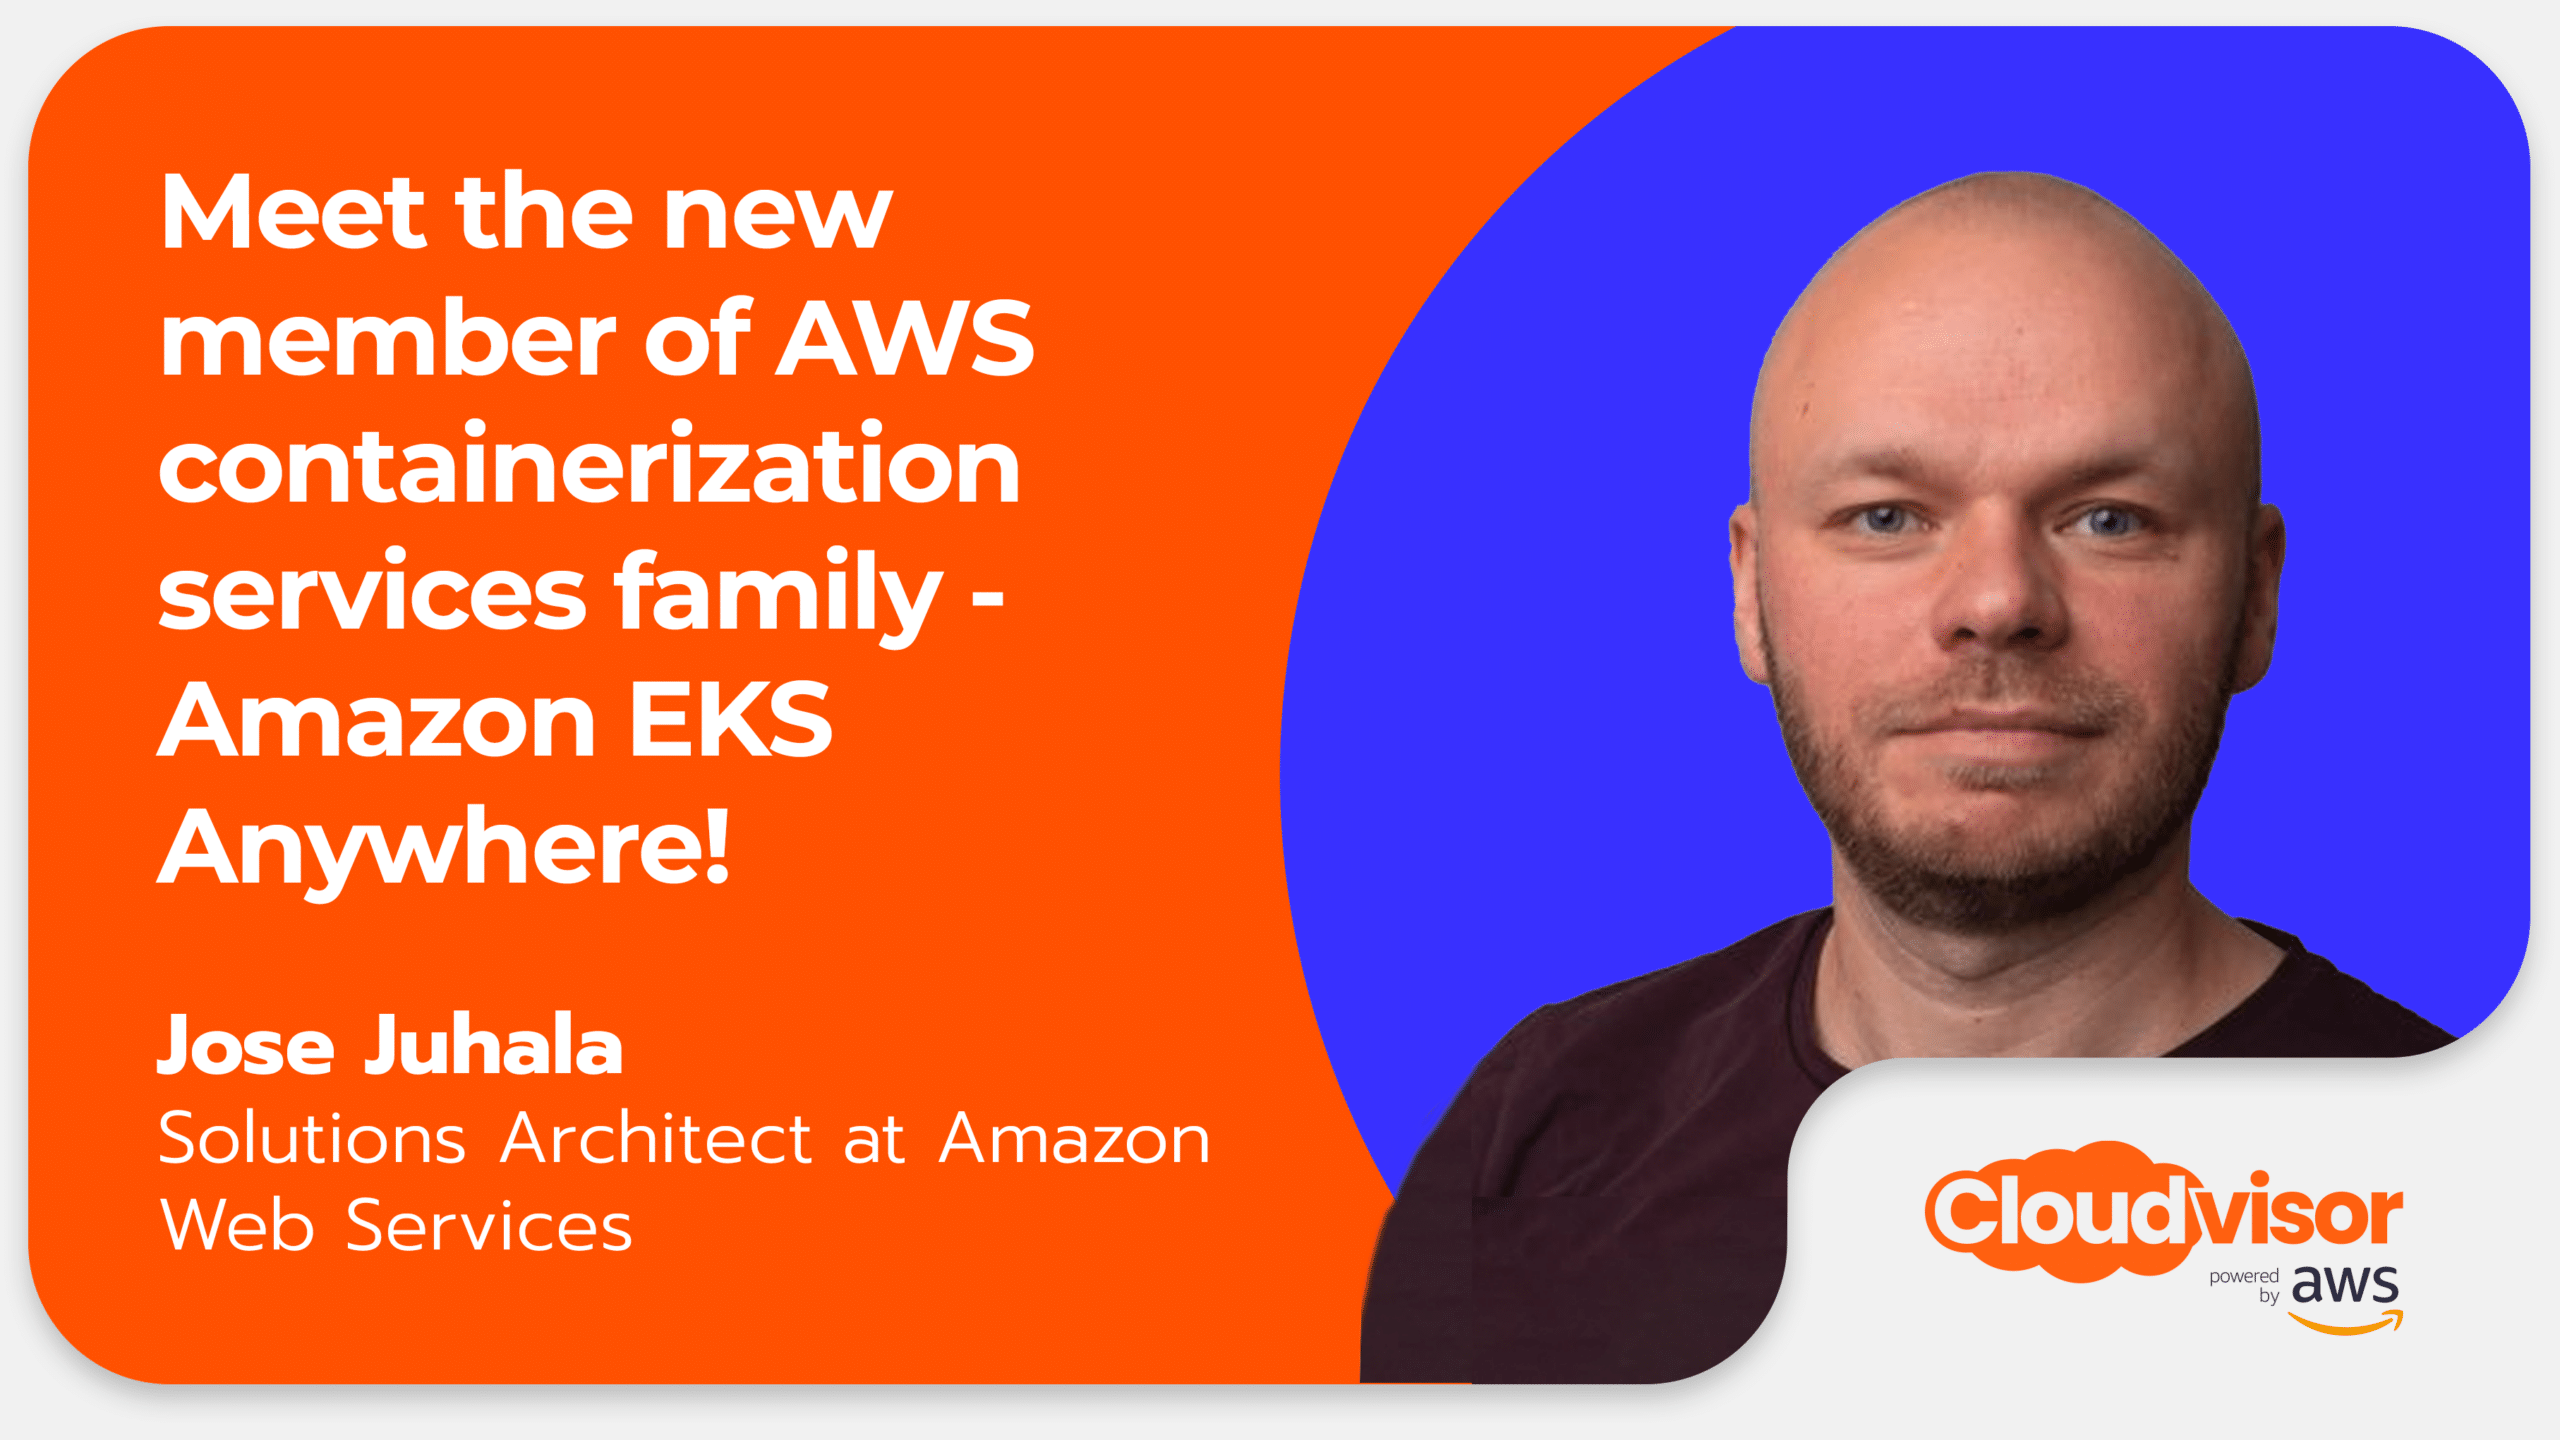 Meet the New Member of AWS Containerization Services Family – Amazon EKS Anywhere!